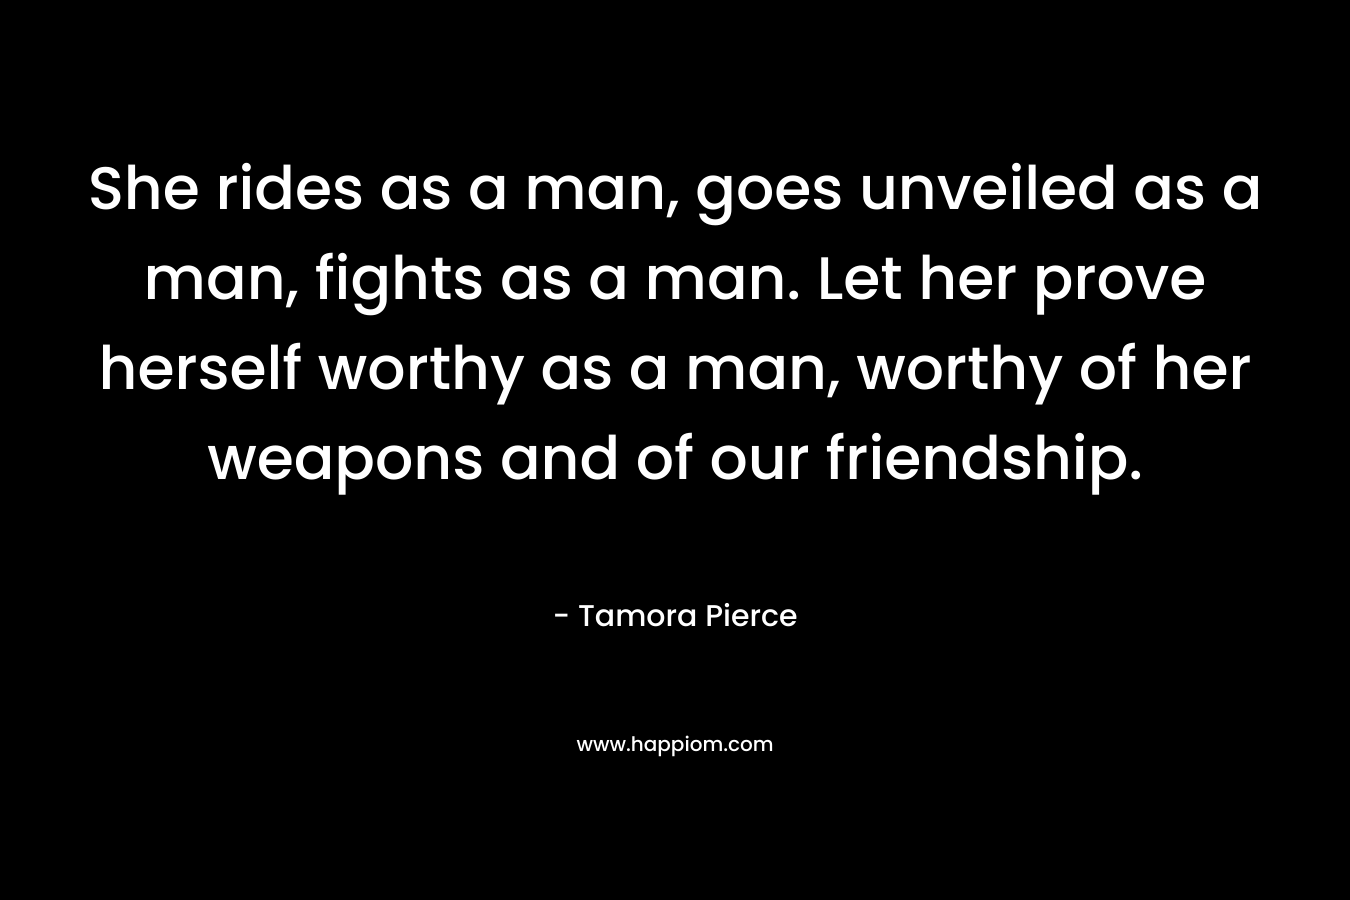 She rides as a man, goes unveiled as a man, fights as a man. Let her prove herself worthy as a man, worthy of her weapons and of our friendship. – Tamora Pierce